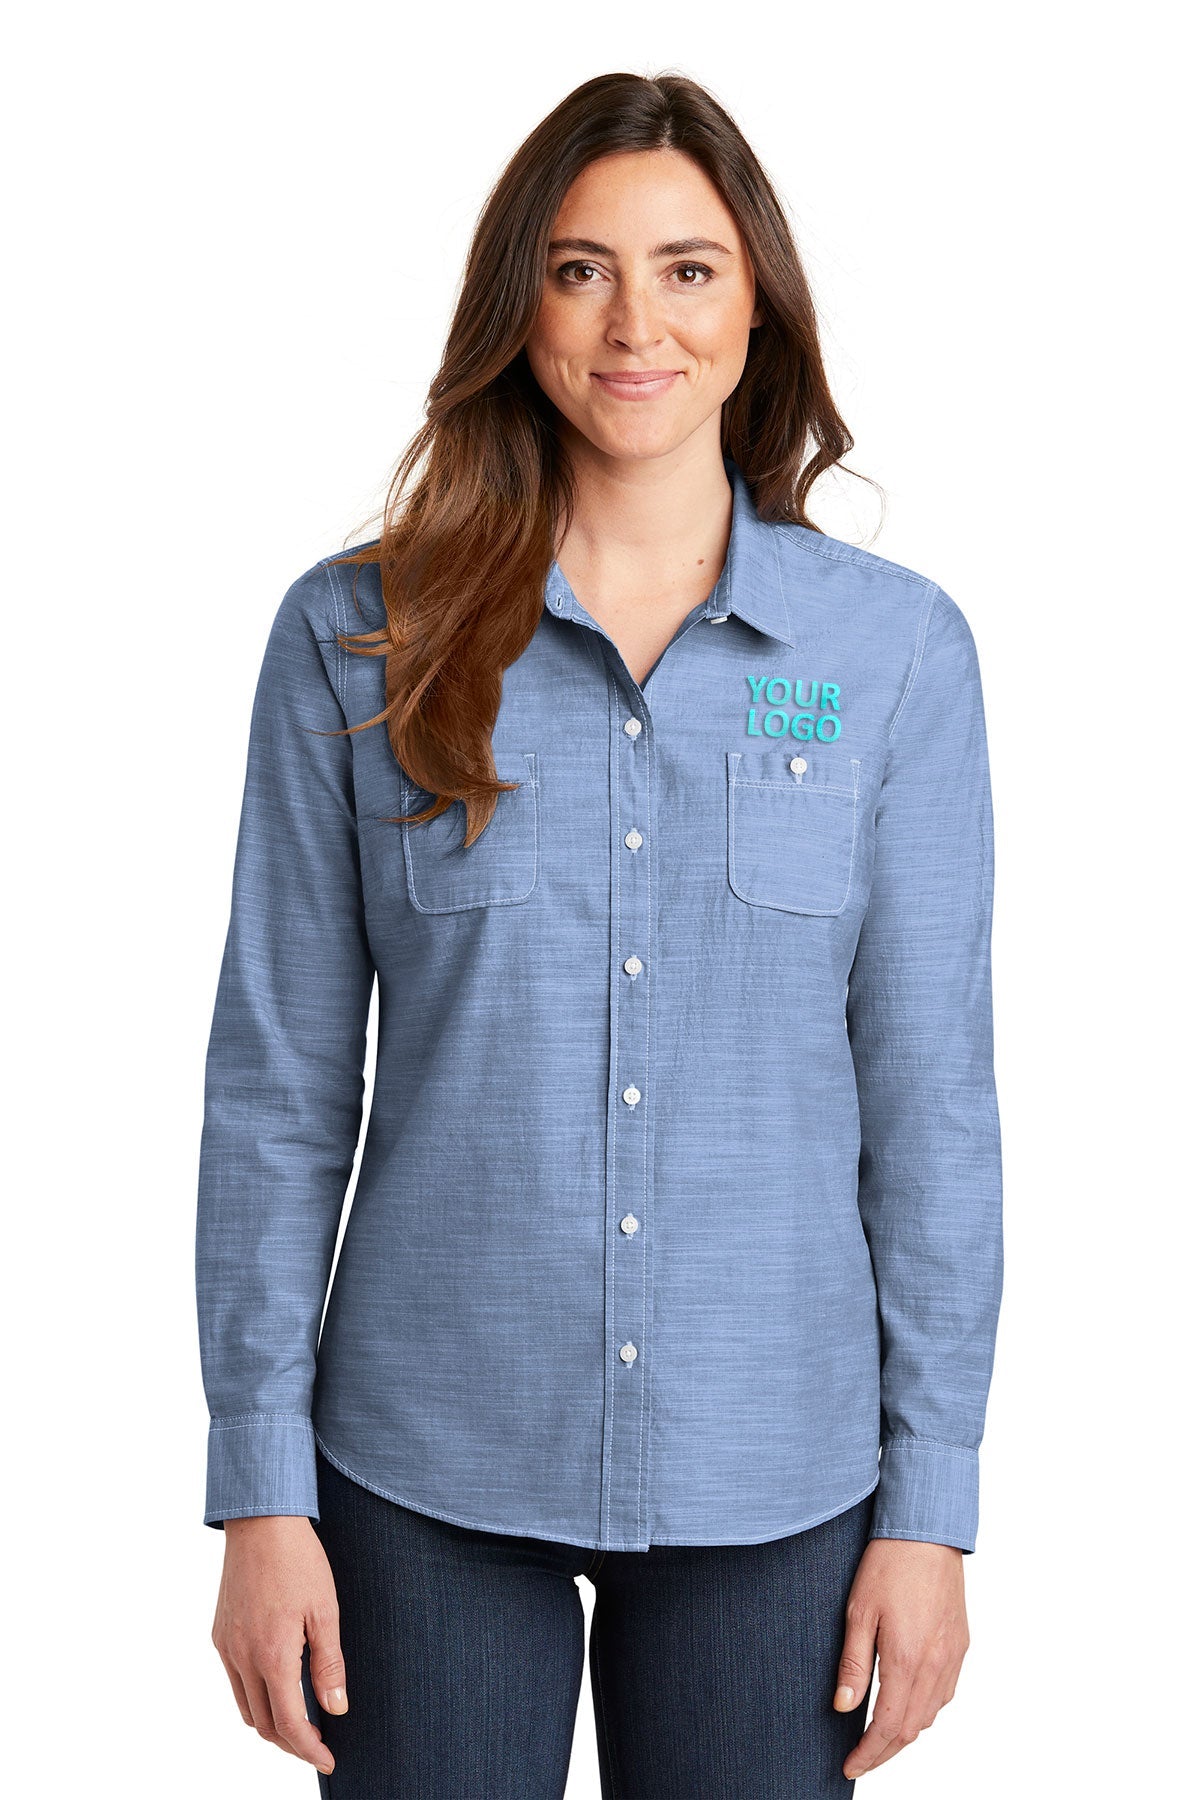 Port Authority Light Blue LW380 business shirts with company logo